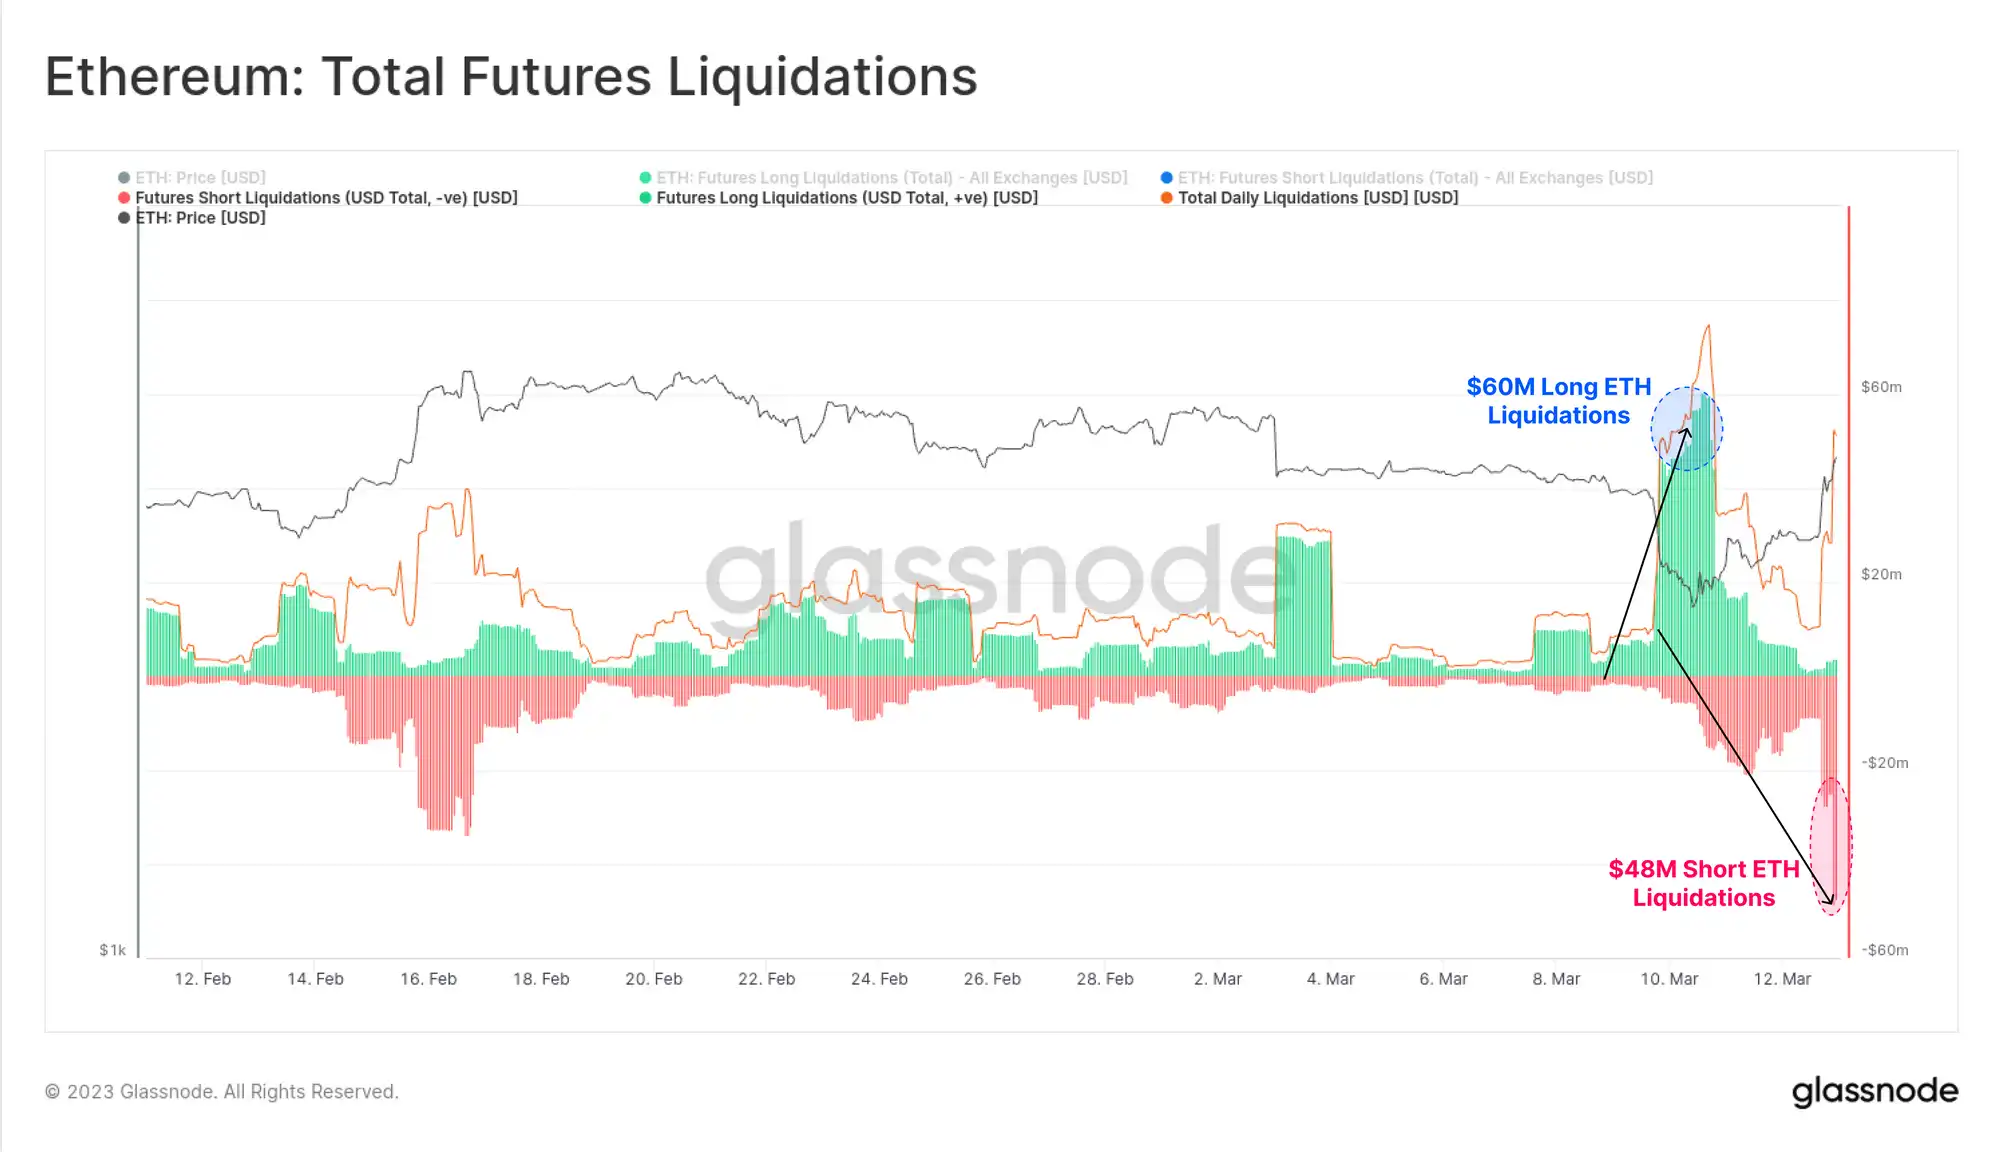 Glassnode: Volatility in Traditional Financial Markets Prompts Bitcoin for a 'V-Shaped' Reversal